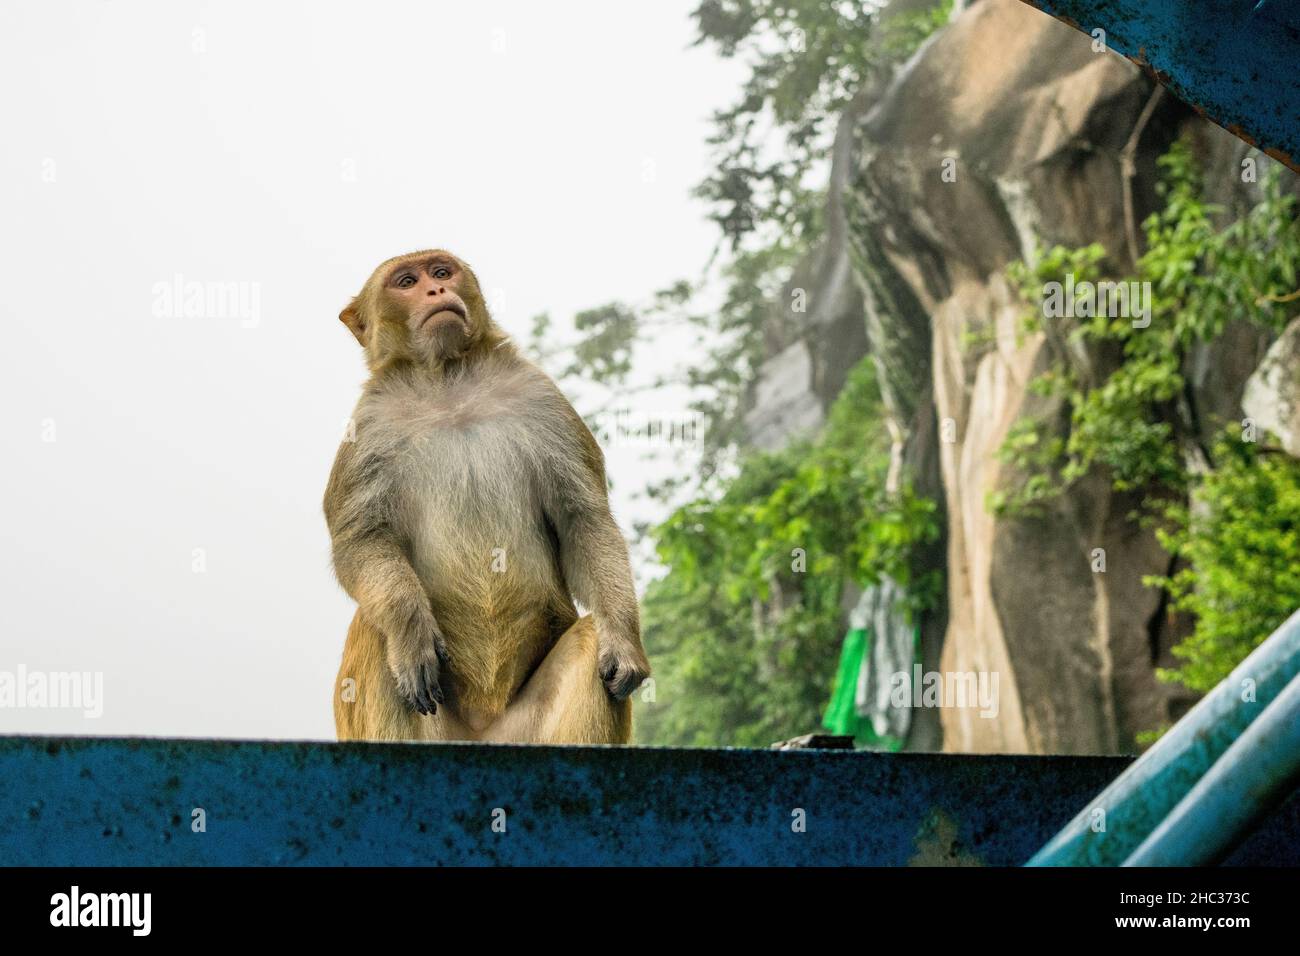 A closeup shot of a Rhesus macaque primate monkey sitting on a metal railing and resting in Myanmar, Burma, Asia Stock Photo